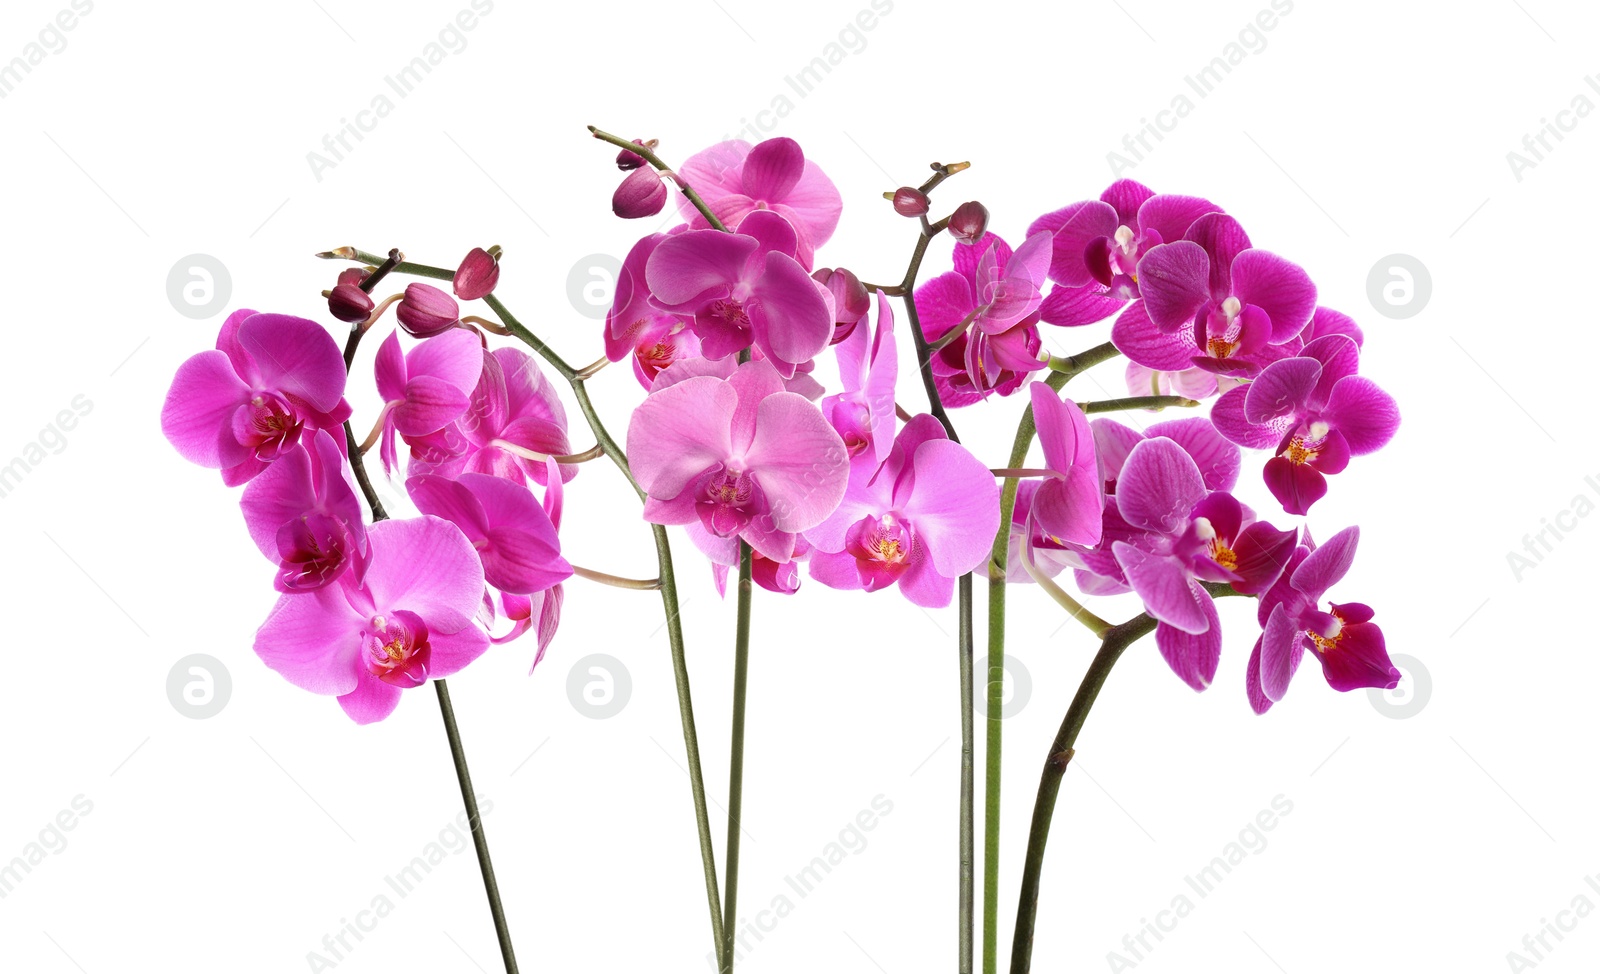 Image of Set of beautiful tropical orchid flowers on white background